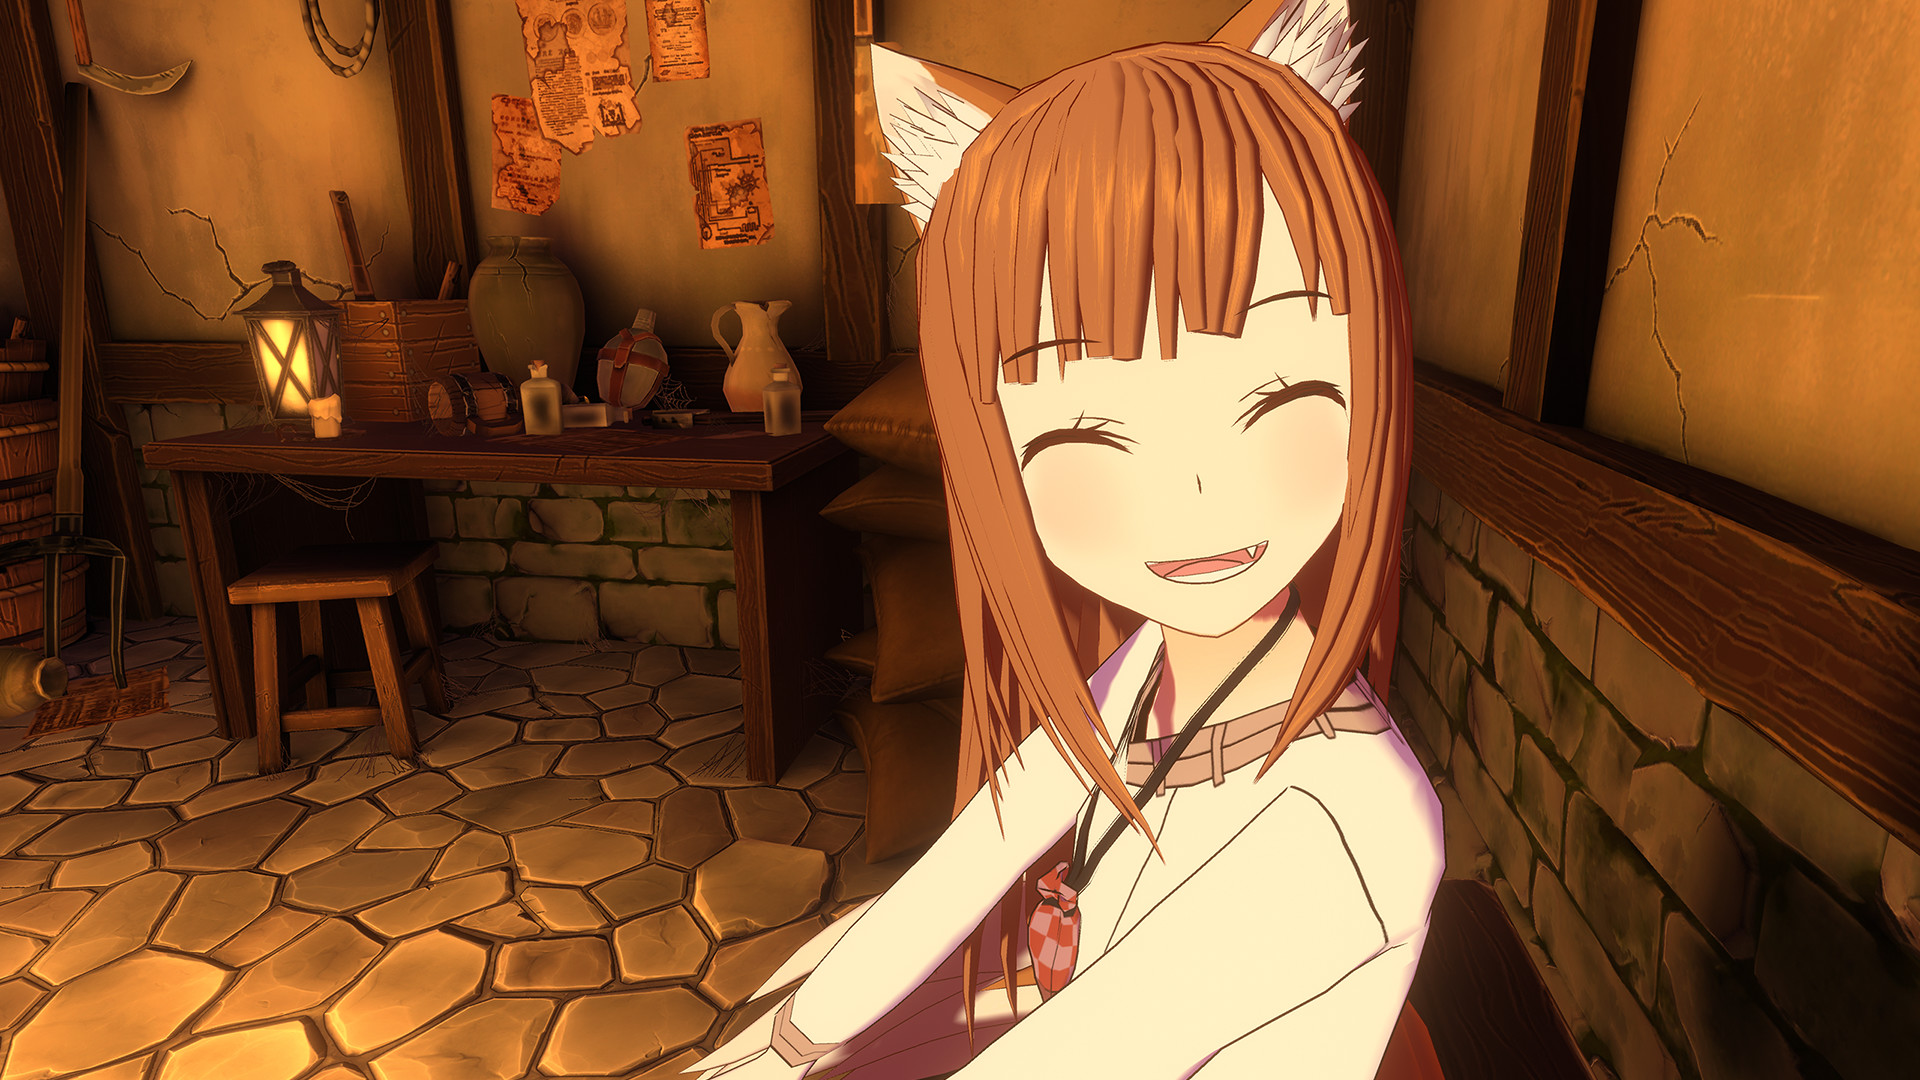 Холо 3. Холо мудрая. Игра «Spice and Wolf VR». Spice & Wolf VR 1.